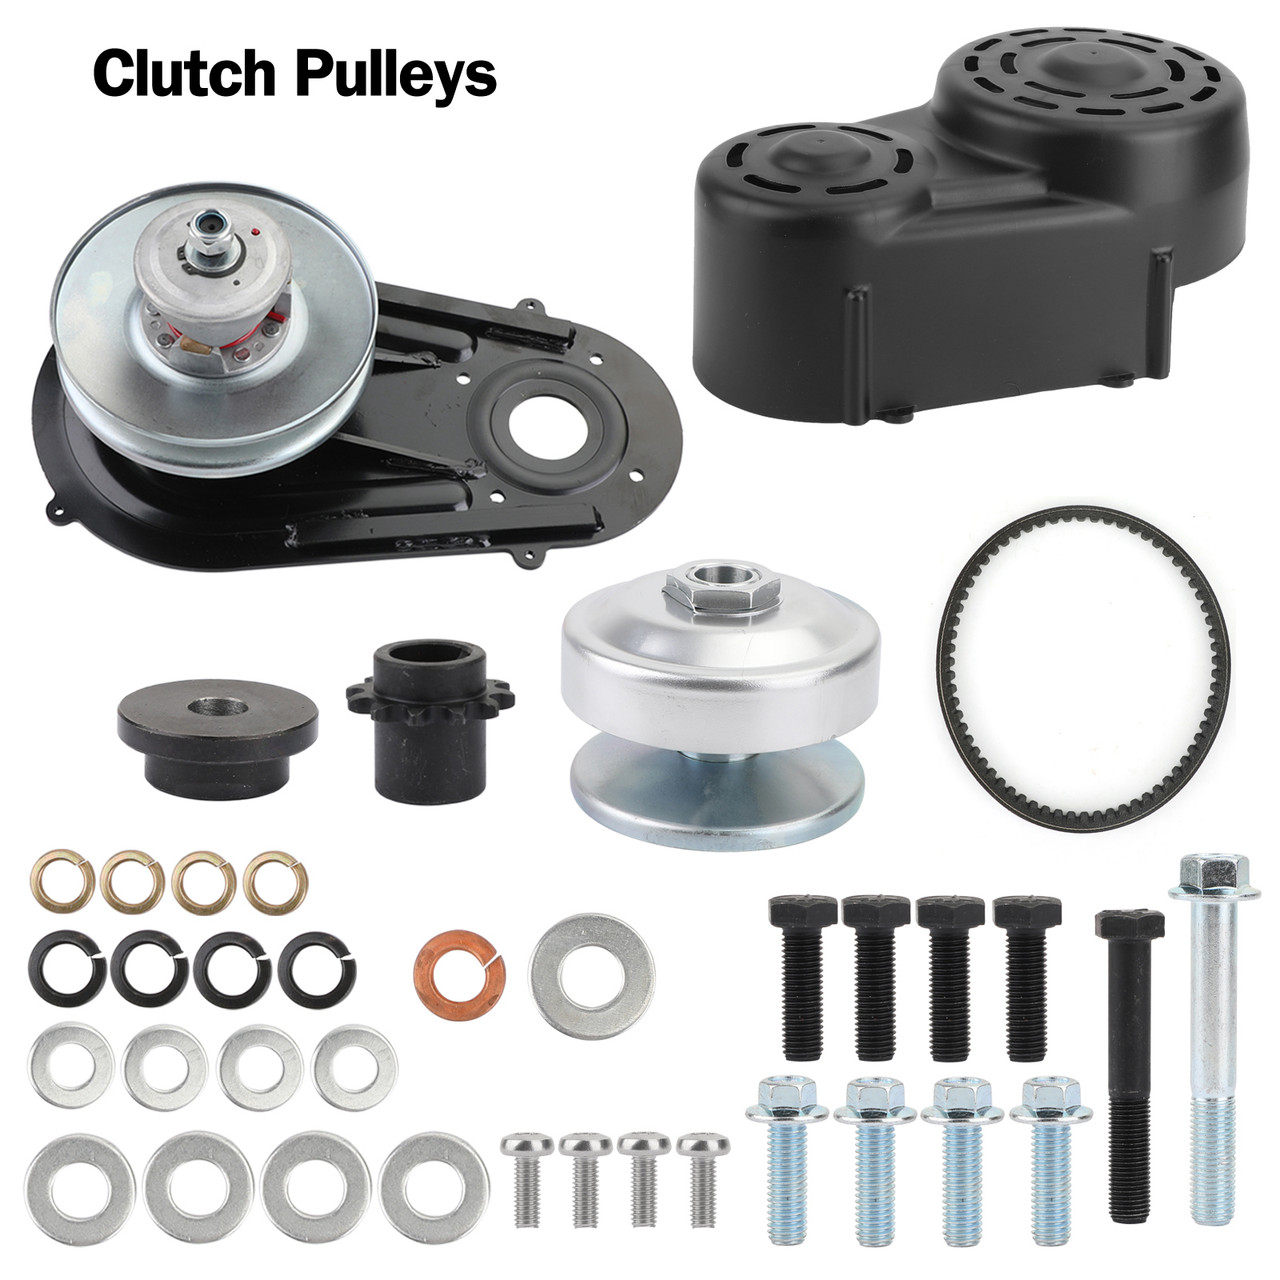 Clutch Pulleys 40 Series Torque Converter Kit with Backplate Belt & Cover